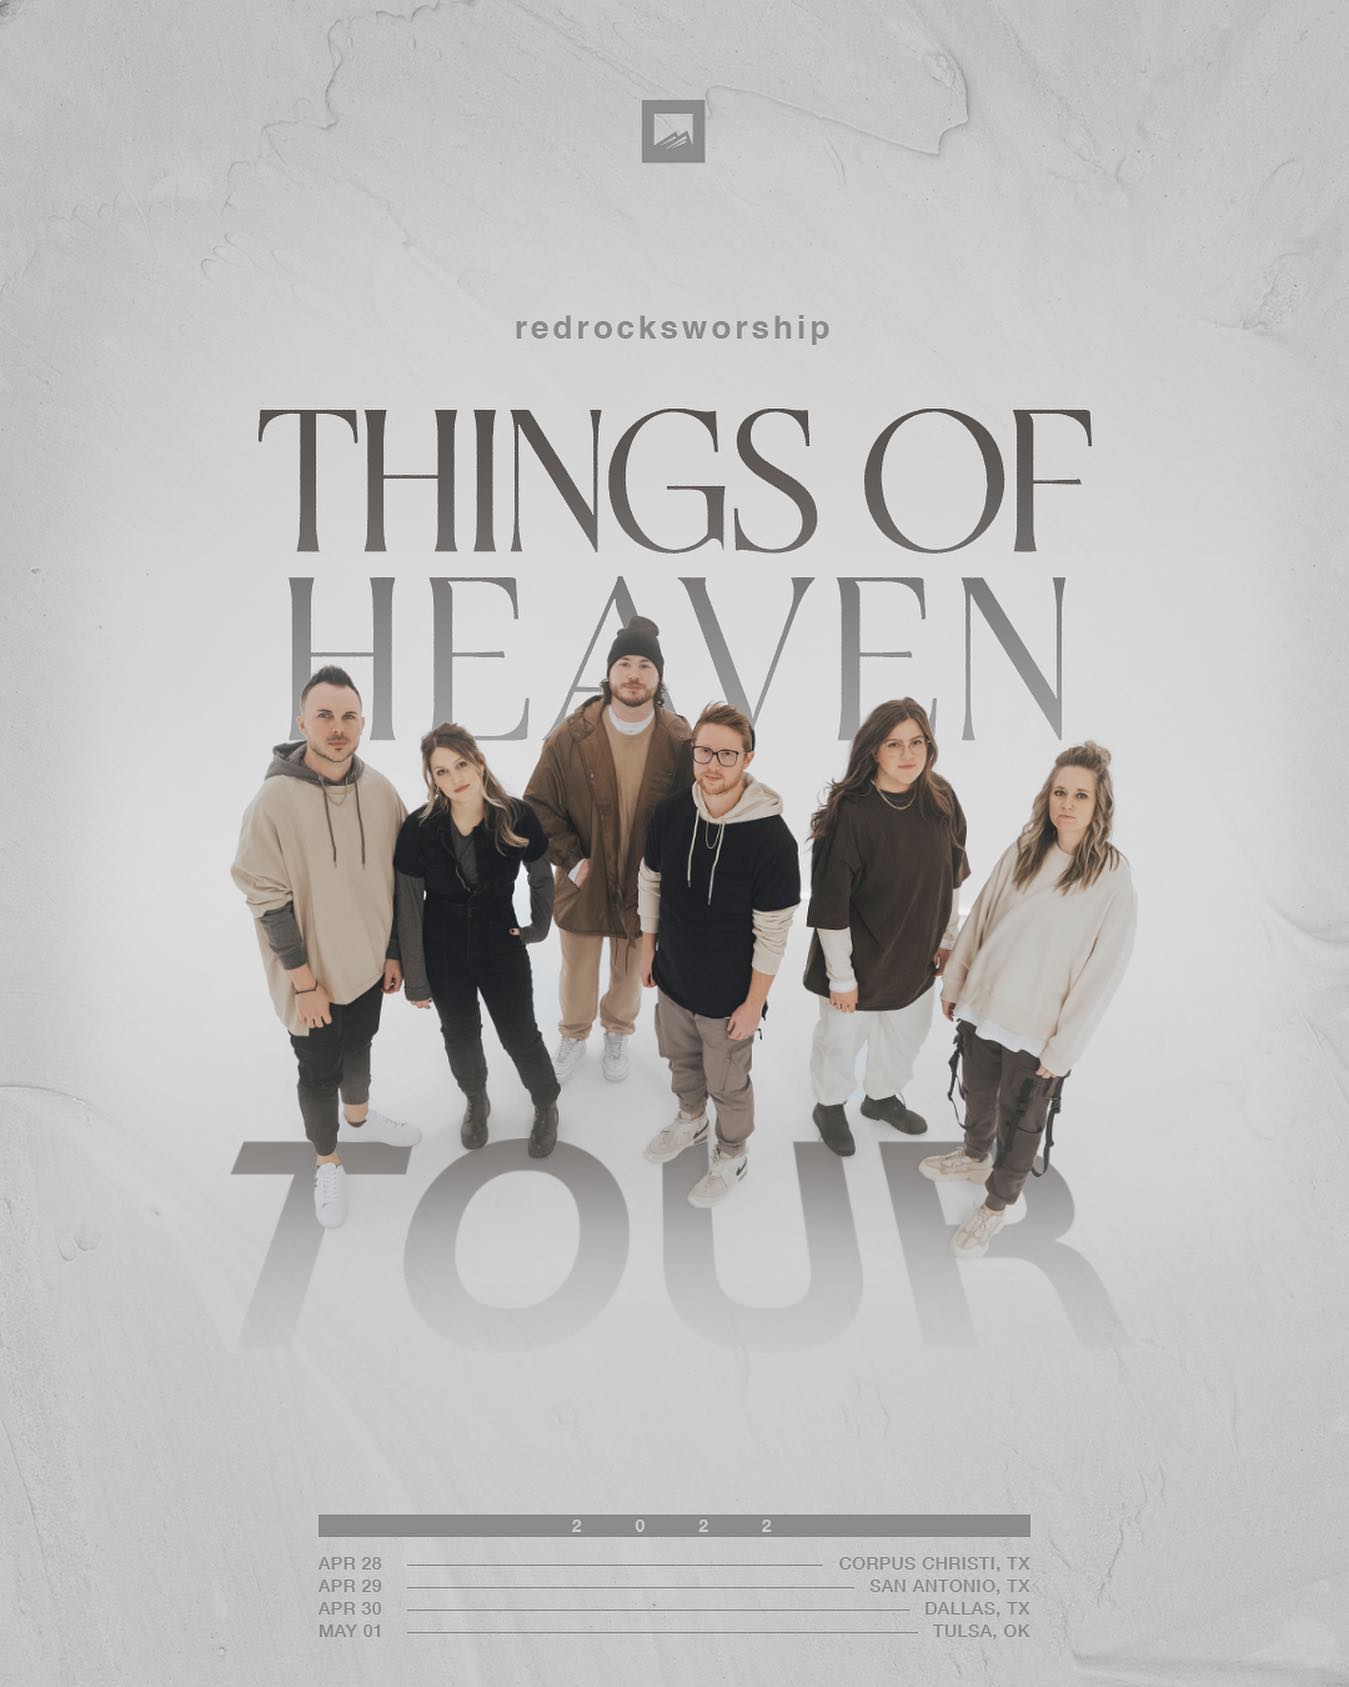 We’re SO excited to launch, for the very first time, the Things of Heaven Tour with @RedRocksWorship 🙌 🙌These will be incredible nights of worship that you won’t want to miss. Pre-Sale starts Sunday (3/13) at 8am cst. 

* April 28 - Corpus Christi, TX
* April 29 - San Antonio, TX
* April 30 - Dallas, TX
* May 1 - Tulsa, OK

🎟 Make sure to join our VIP list on rushconcerts.com for pre-sale access!